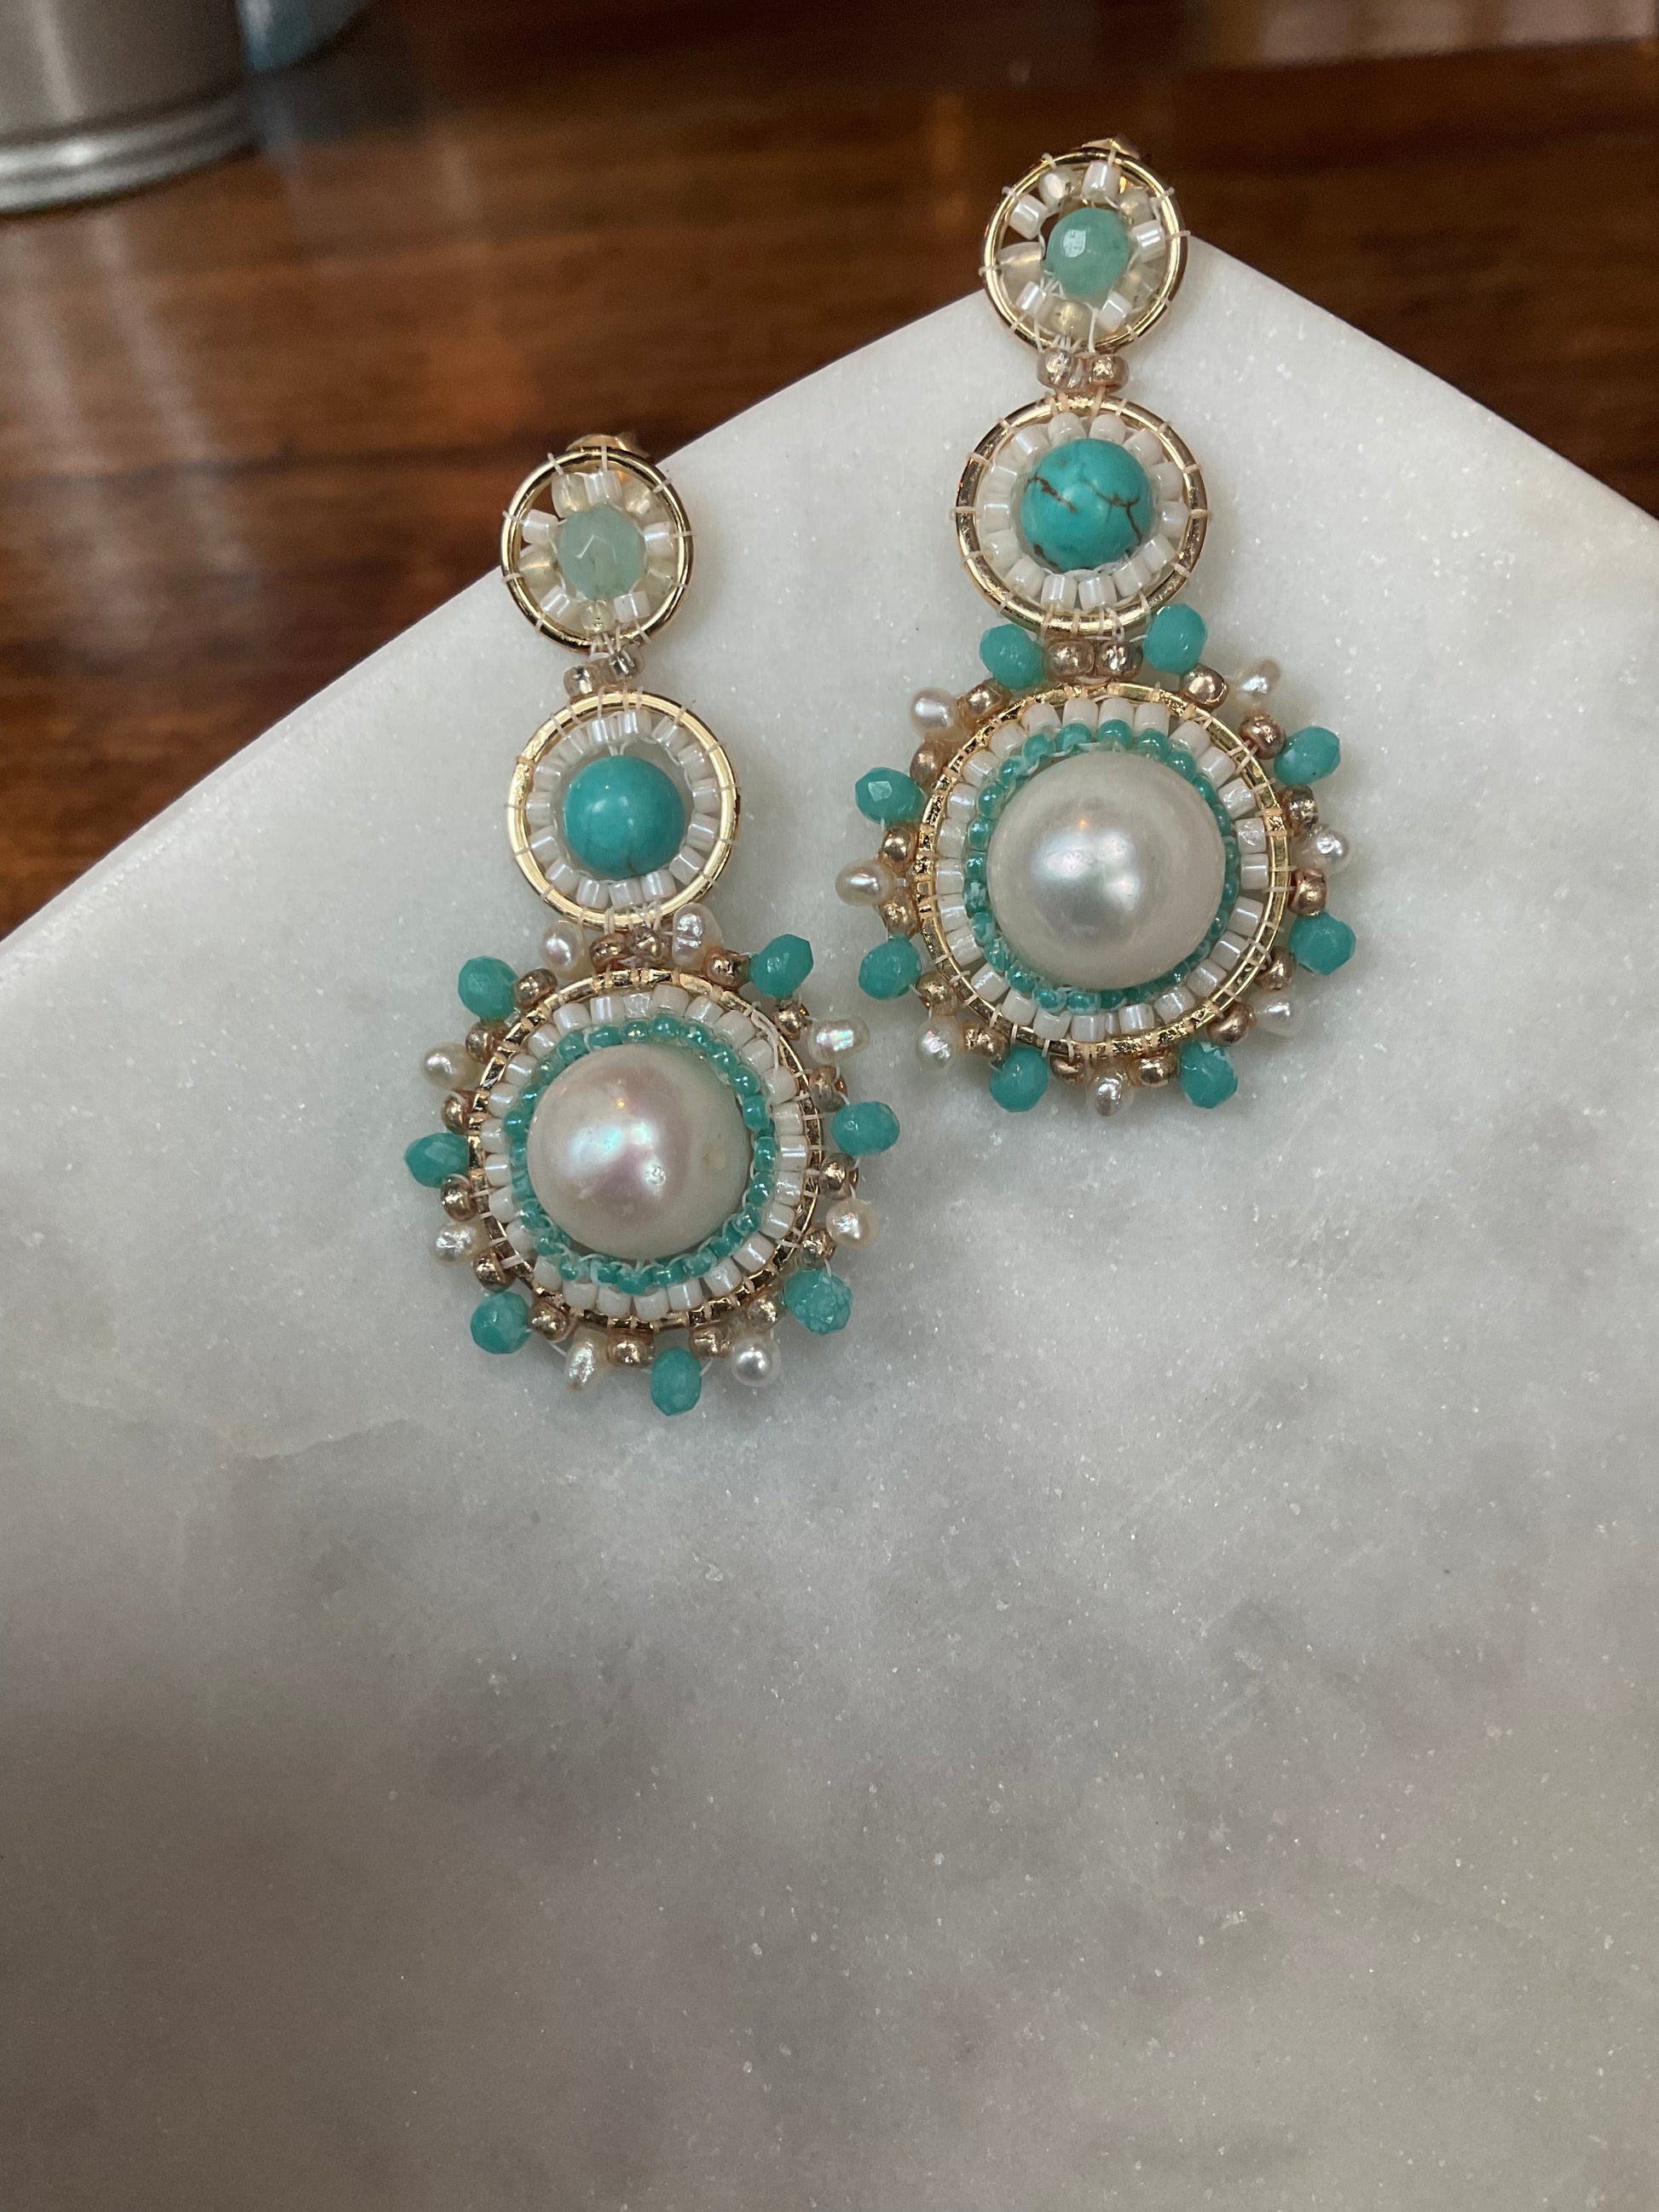 High grade pearls, turquoise stone beads and amazonite stone beads on gold-filled frames with interwoven Miyuki beads. unique and one of a kind earrings